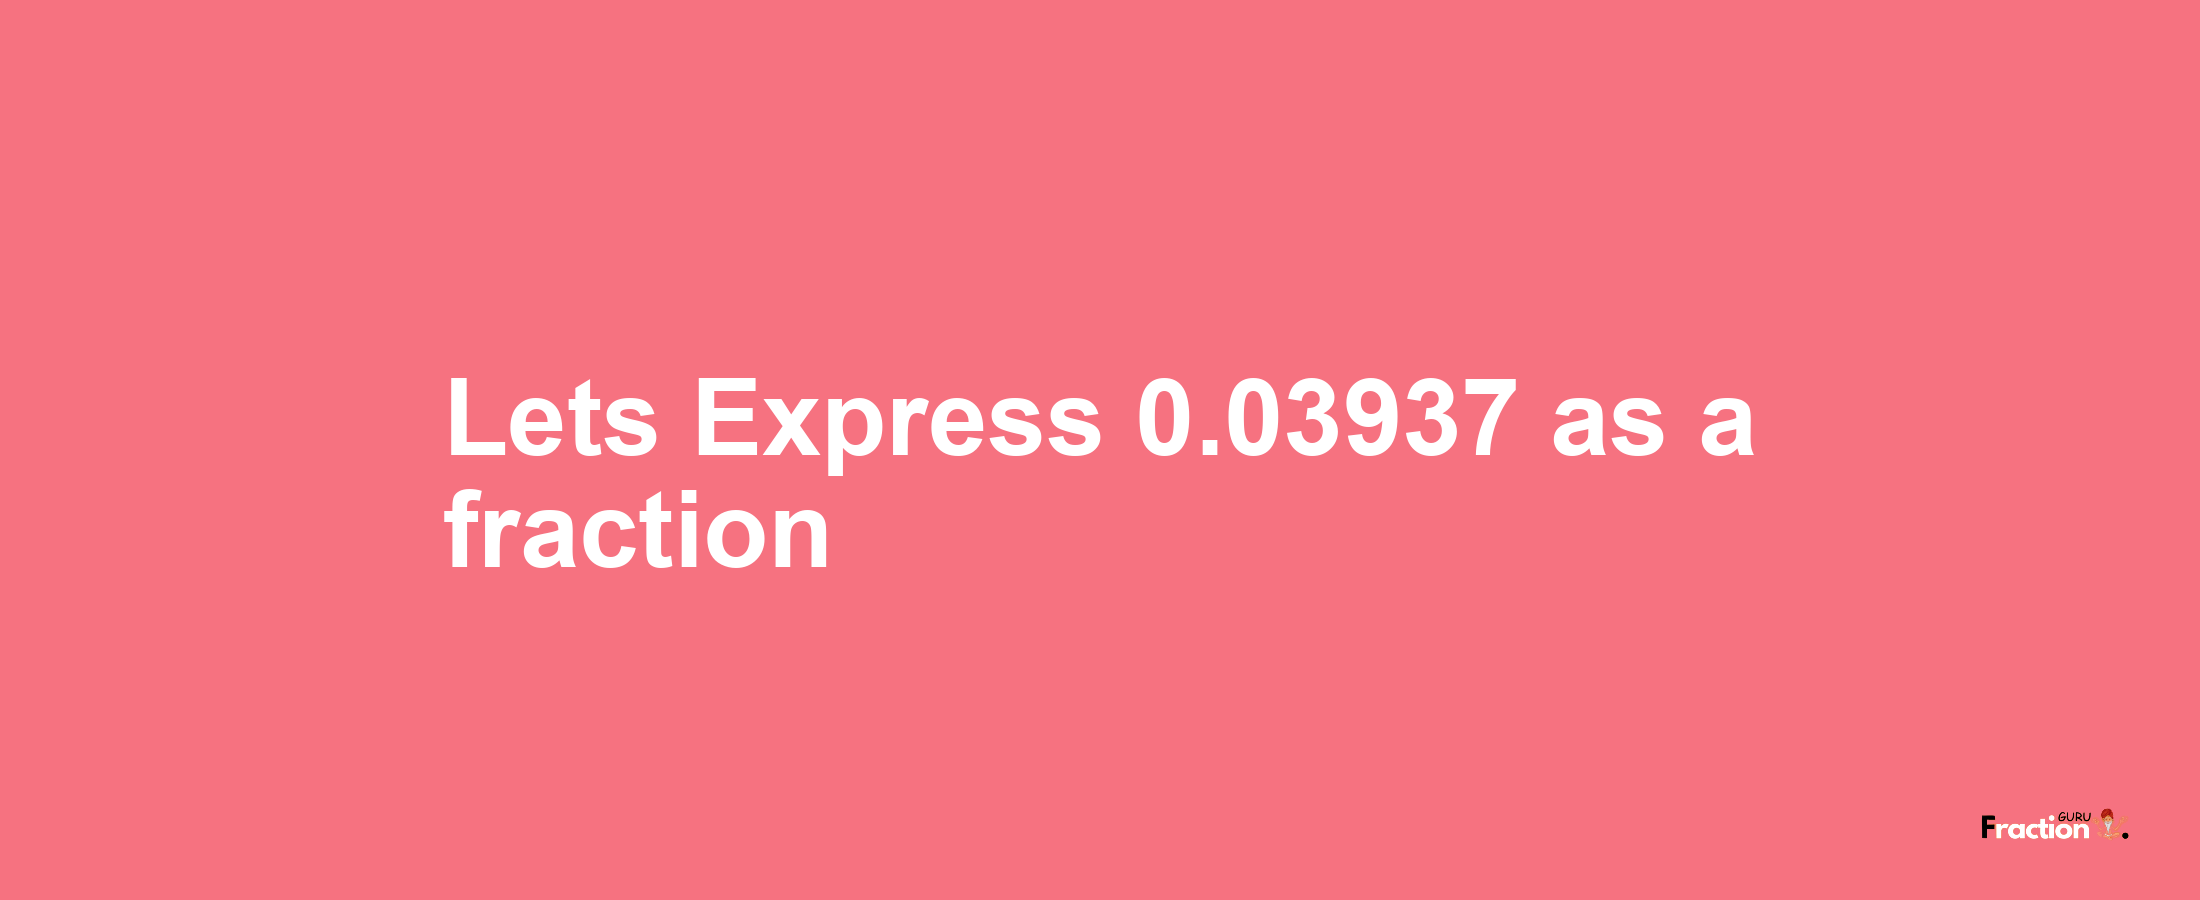 Lets Express 0.03937 as afraction